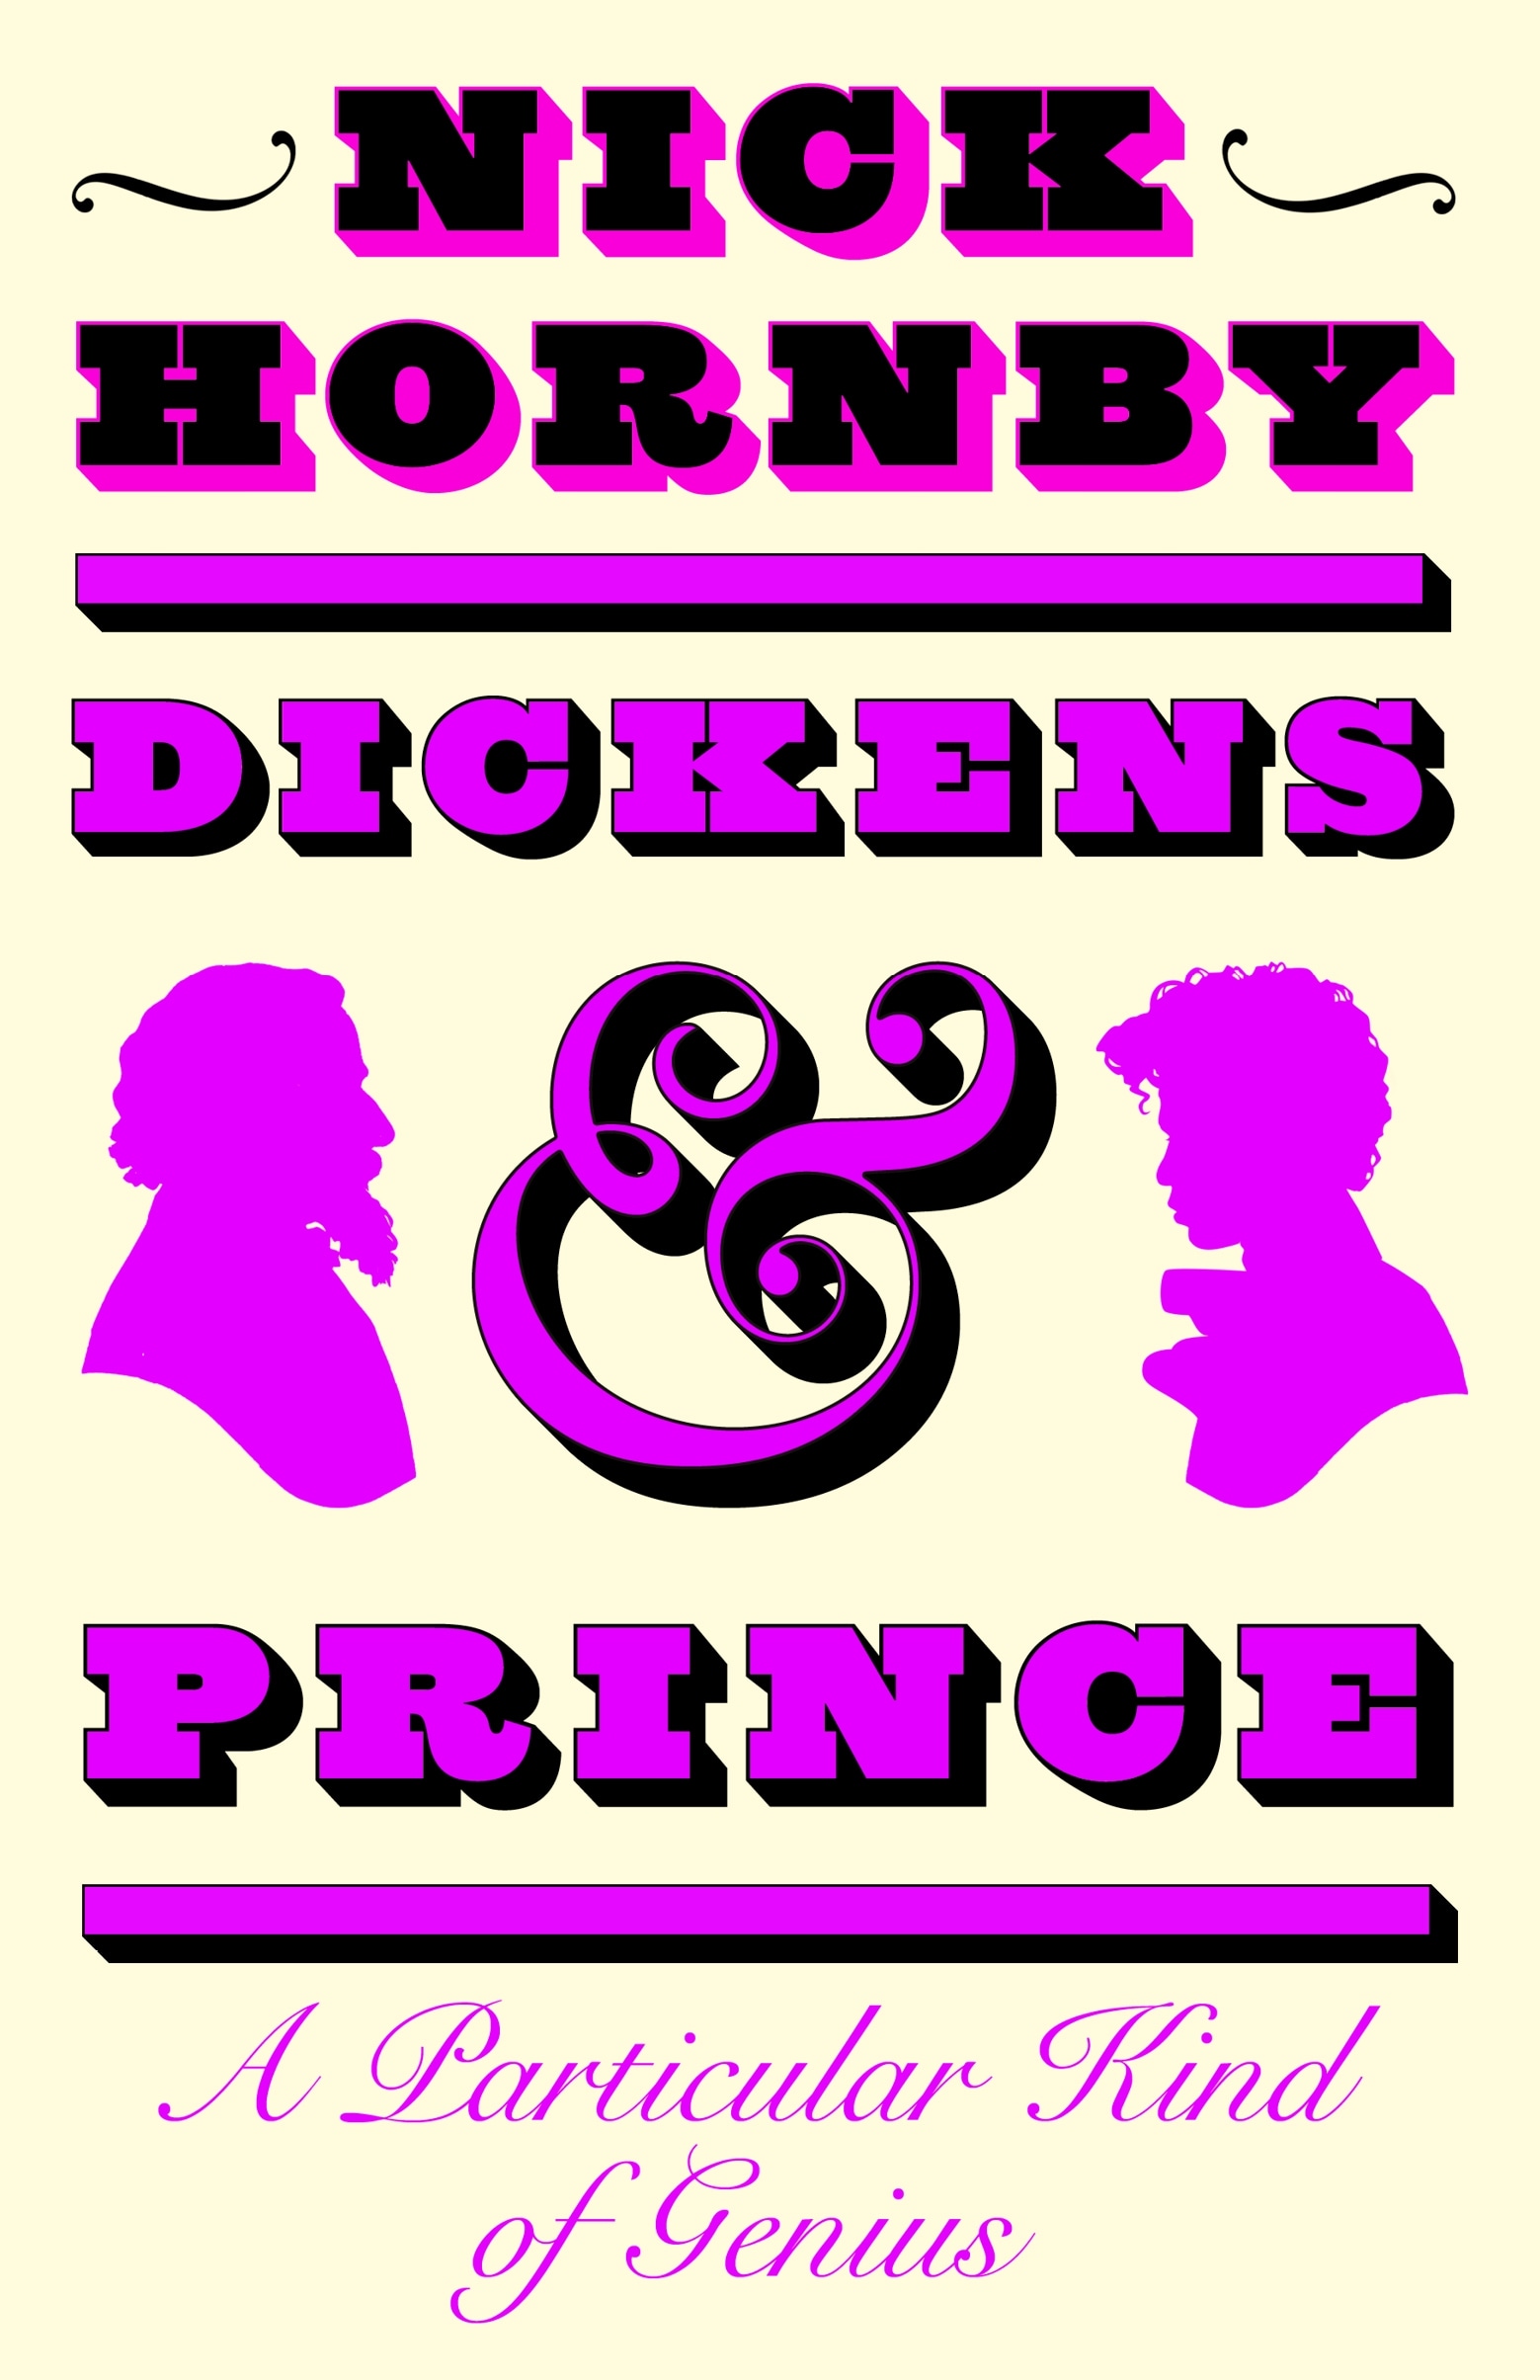 Book “Dickens and Prince” by Nick Hornby — October 27, 2022